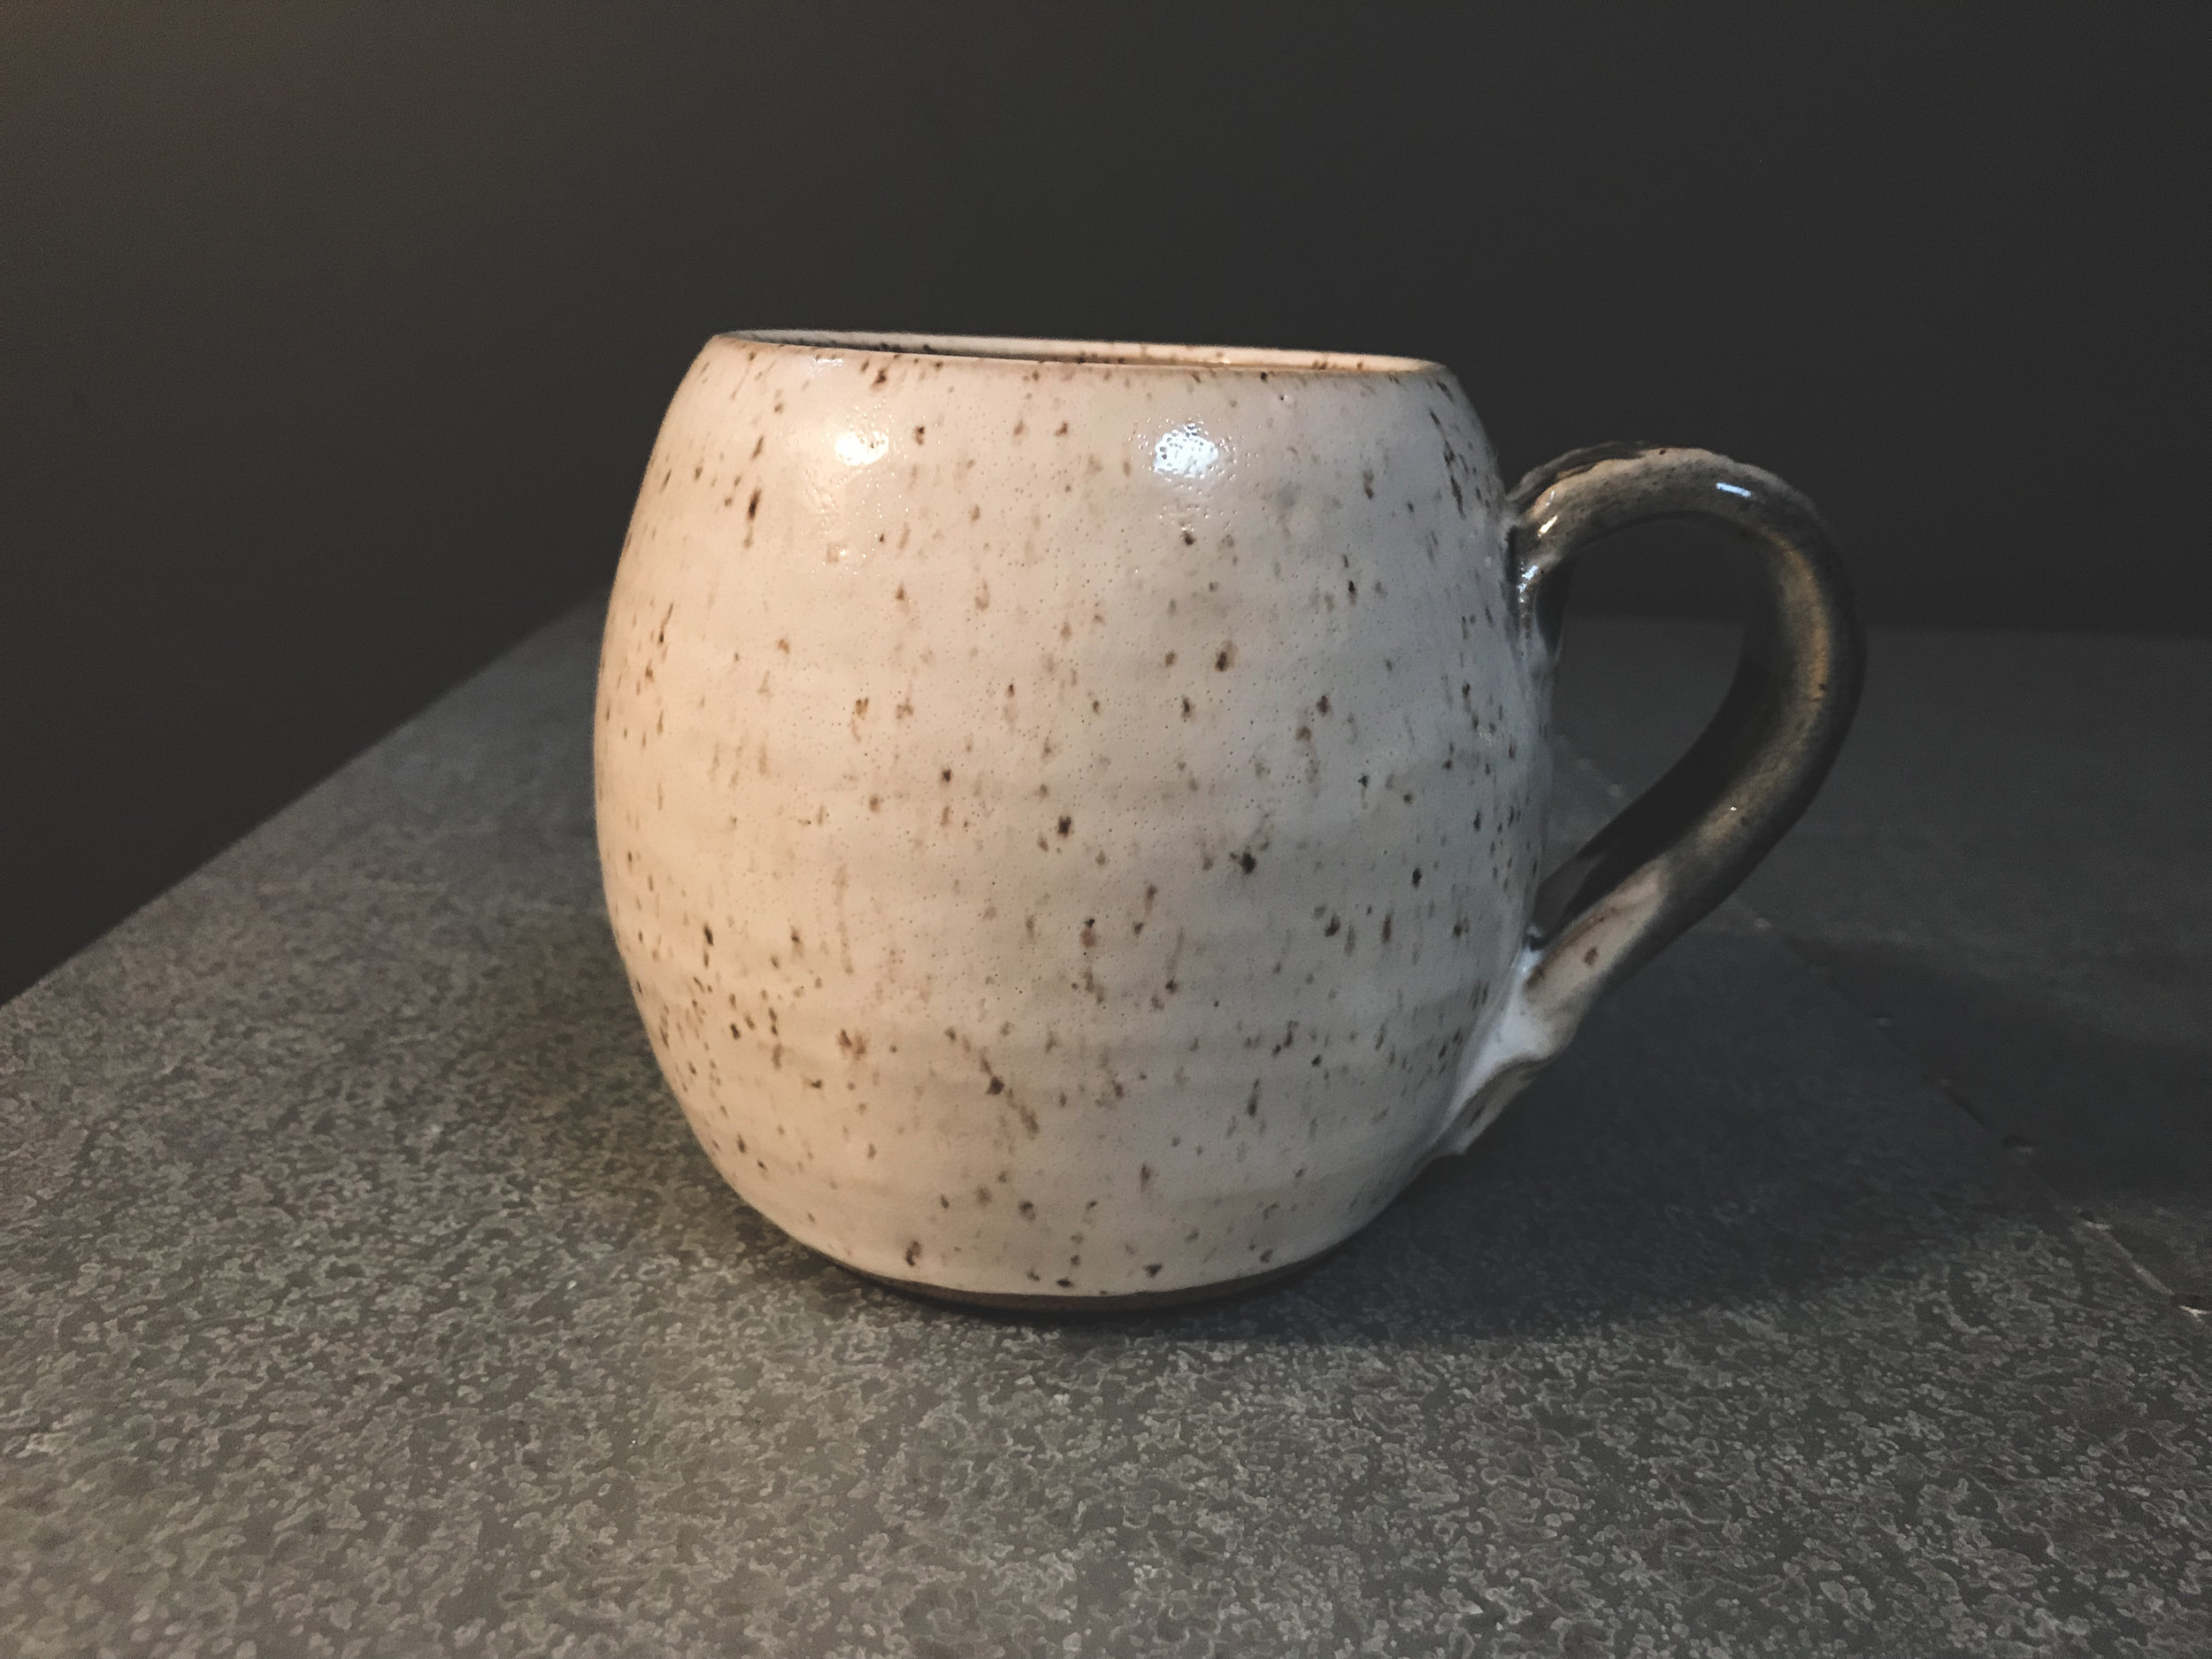  I like the shape of this one, and the speckled white glaze looks great. 